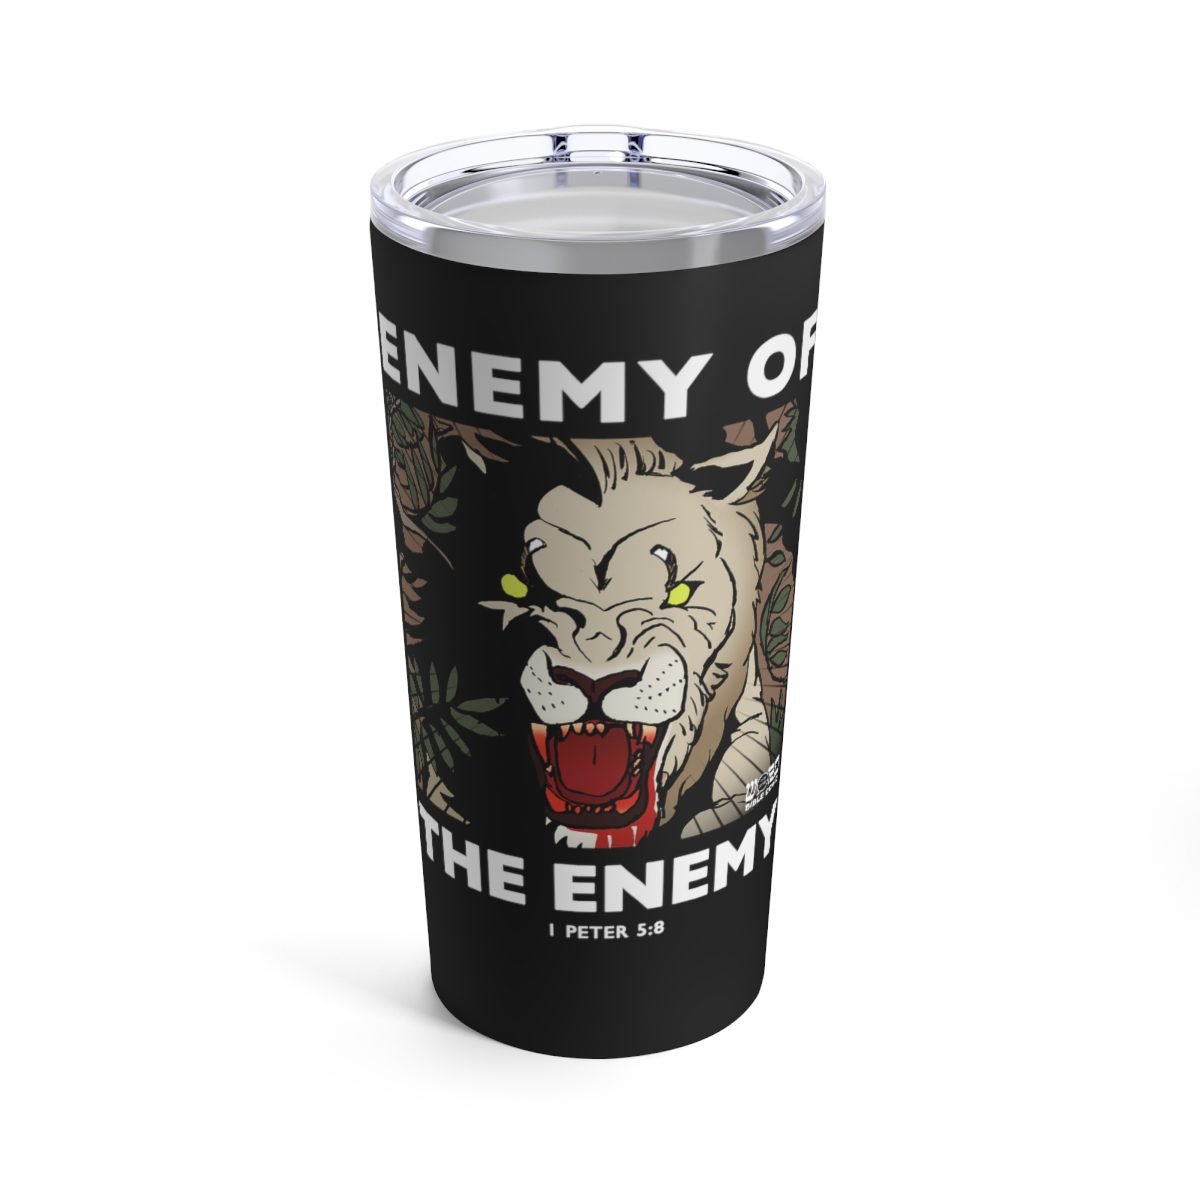 Word For Word Bible Comics – Enemy of the Enemy 20oz Stainless Steel Tumbler